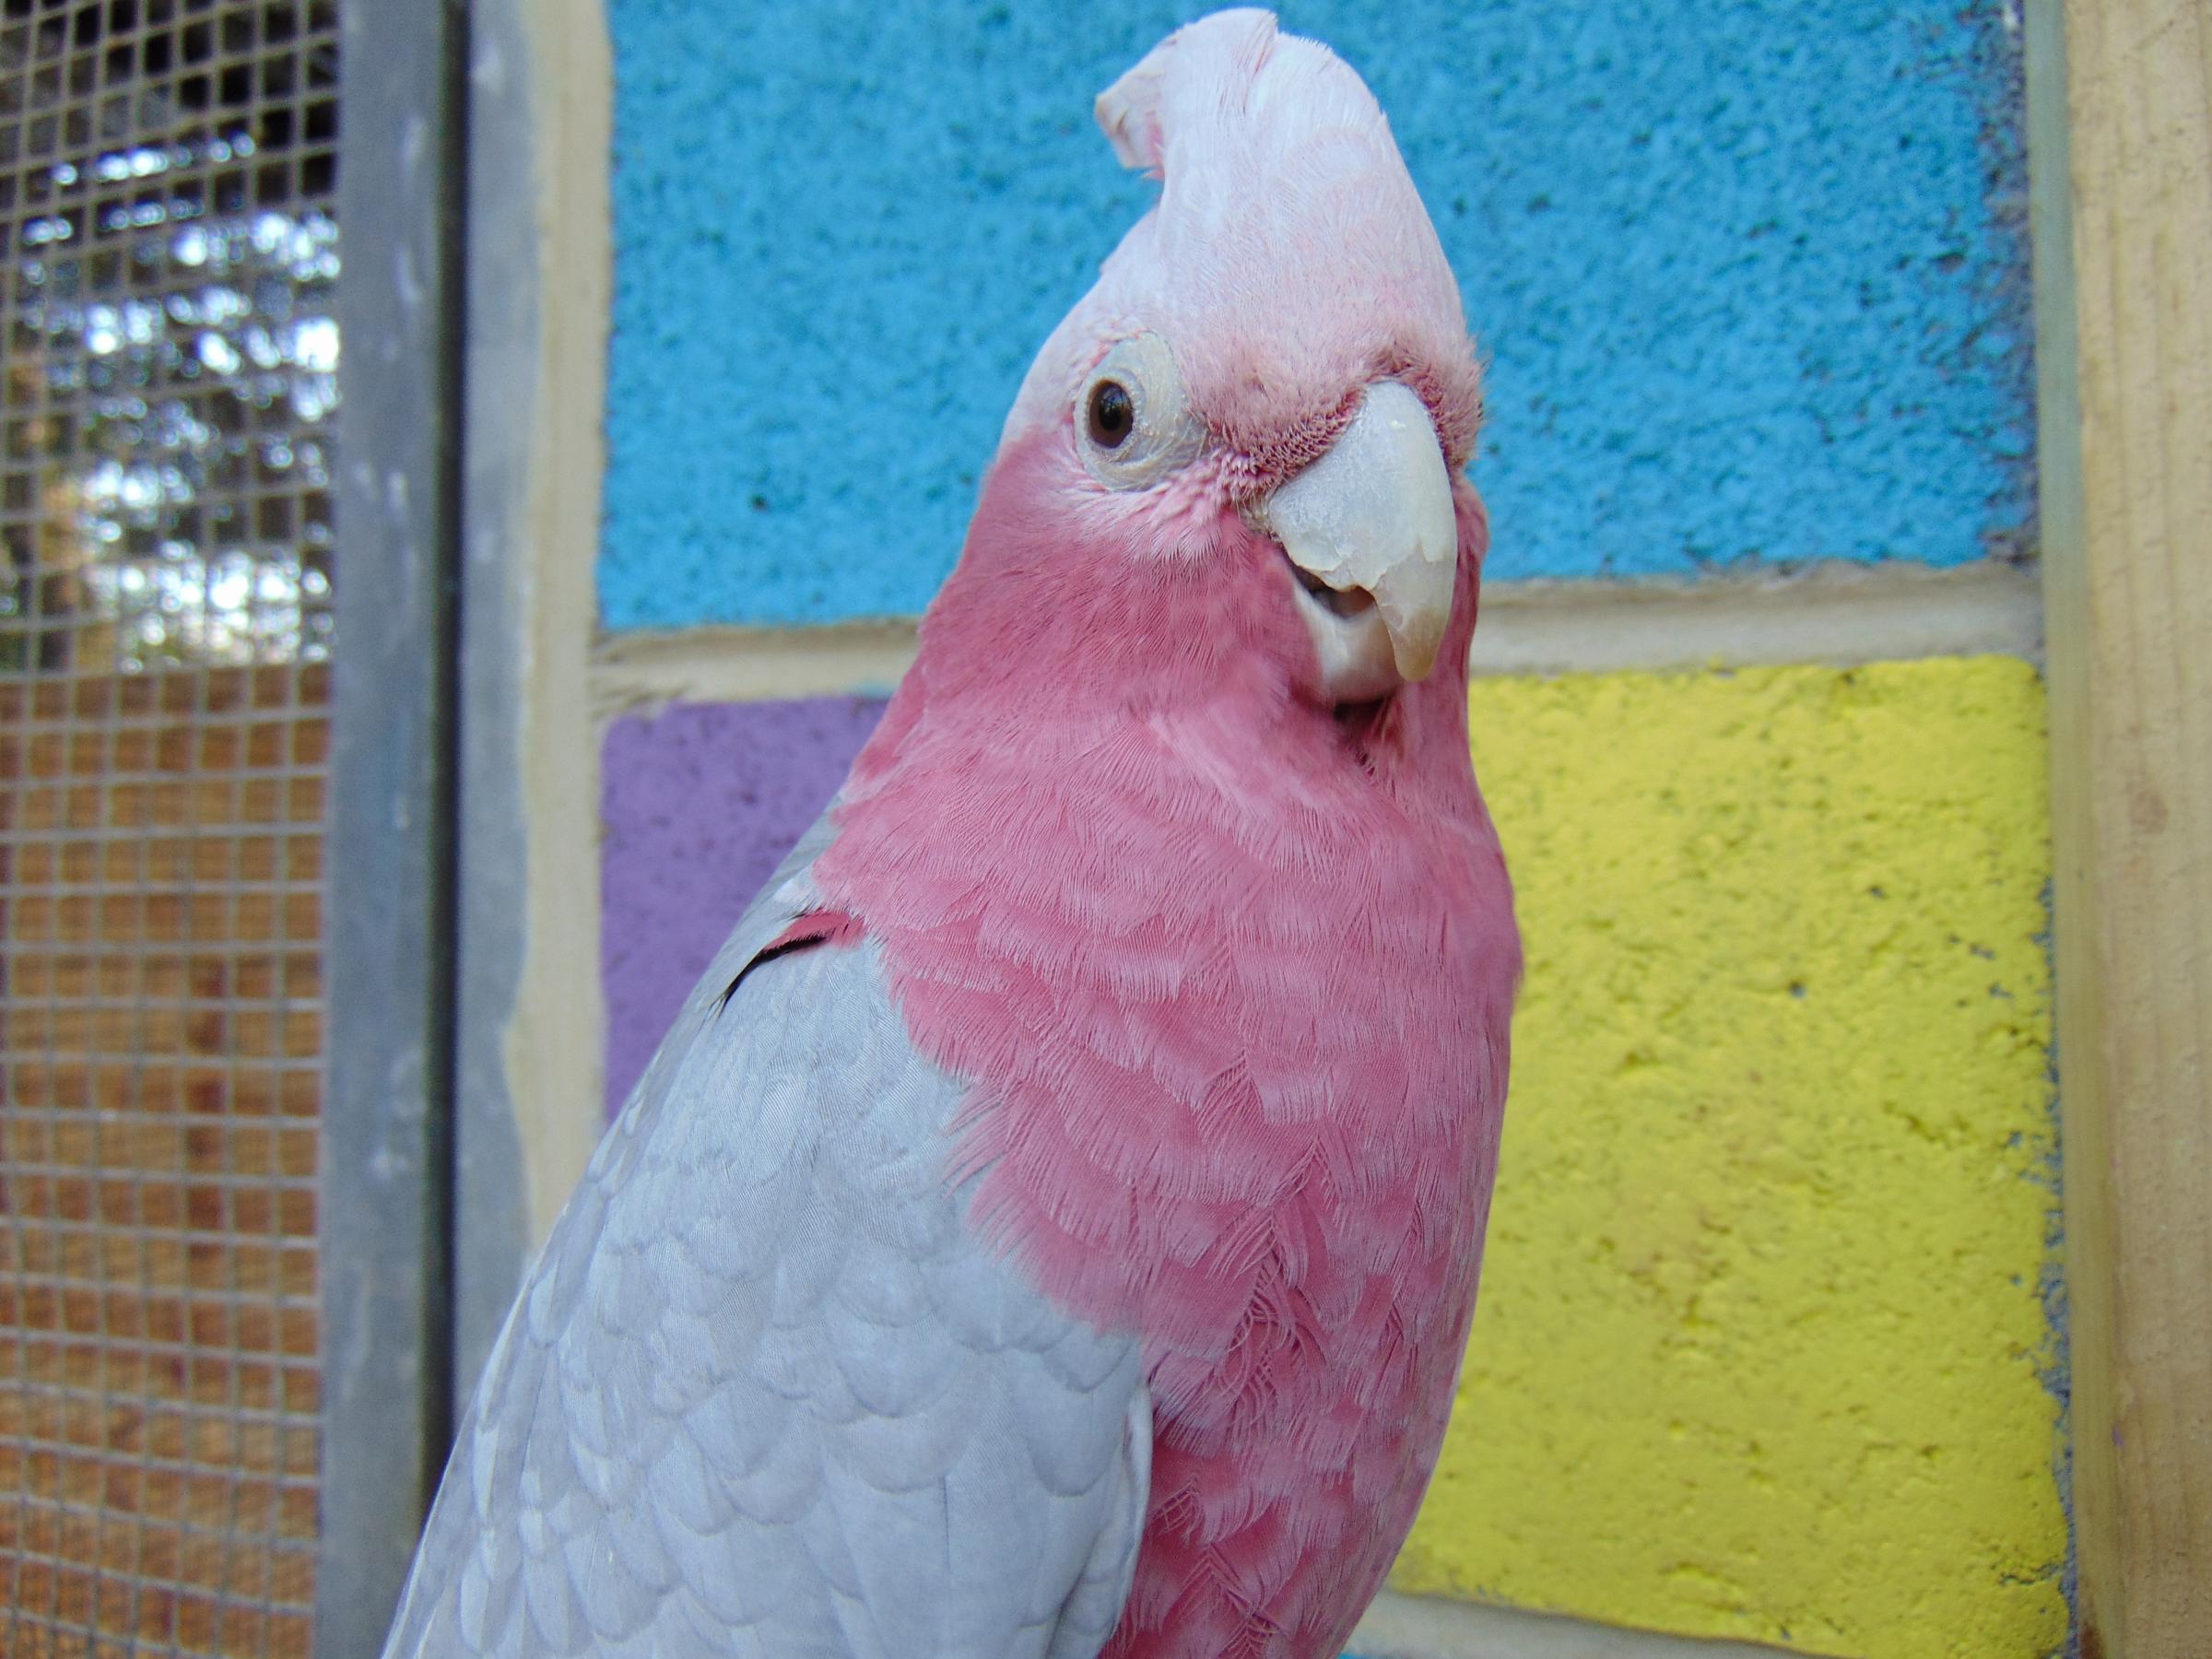 Louie,the Galah cockatoo, who is already making a name for himself